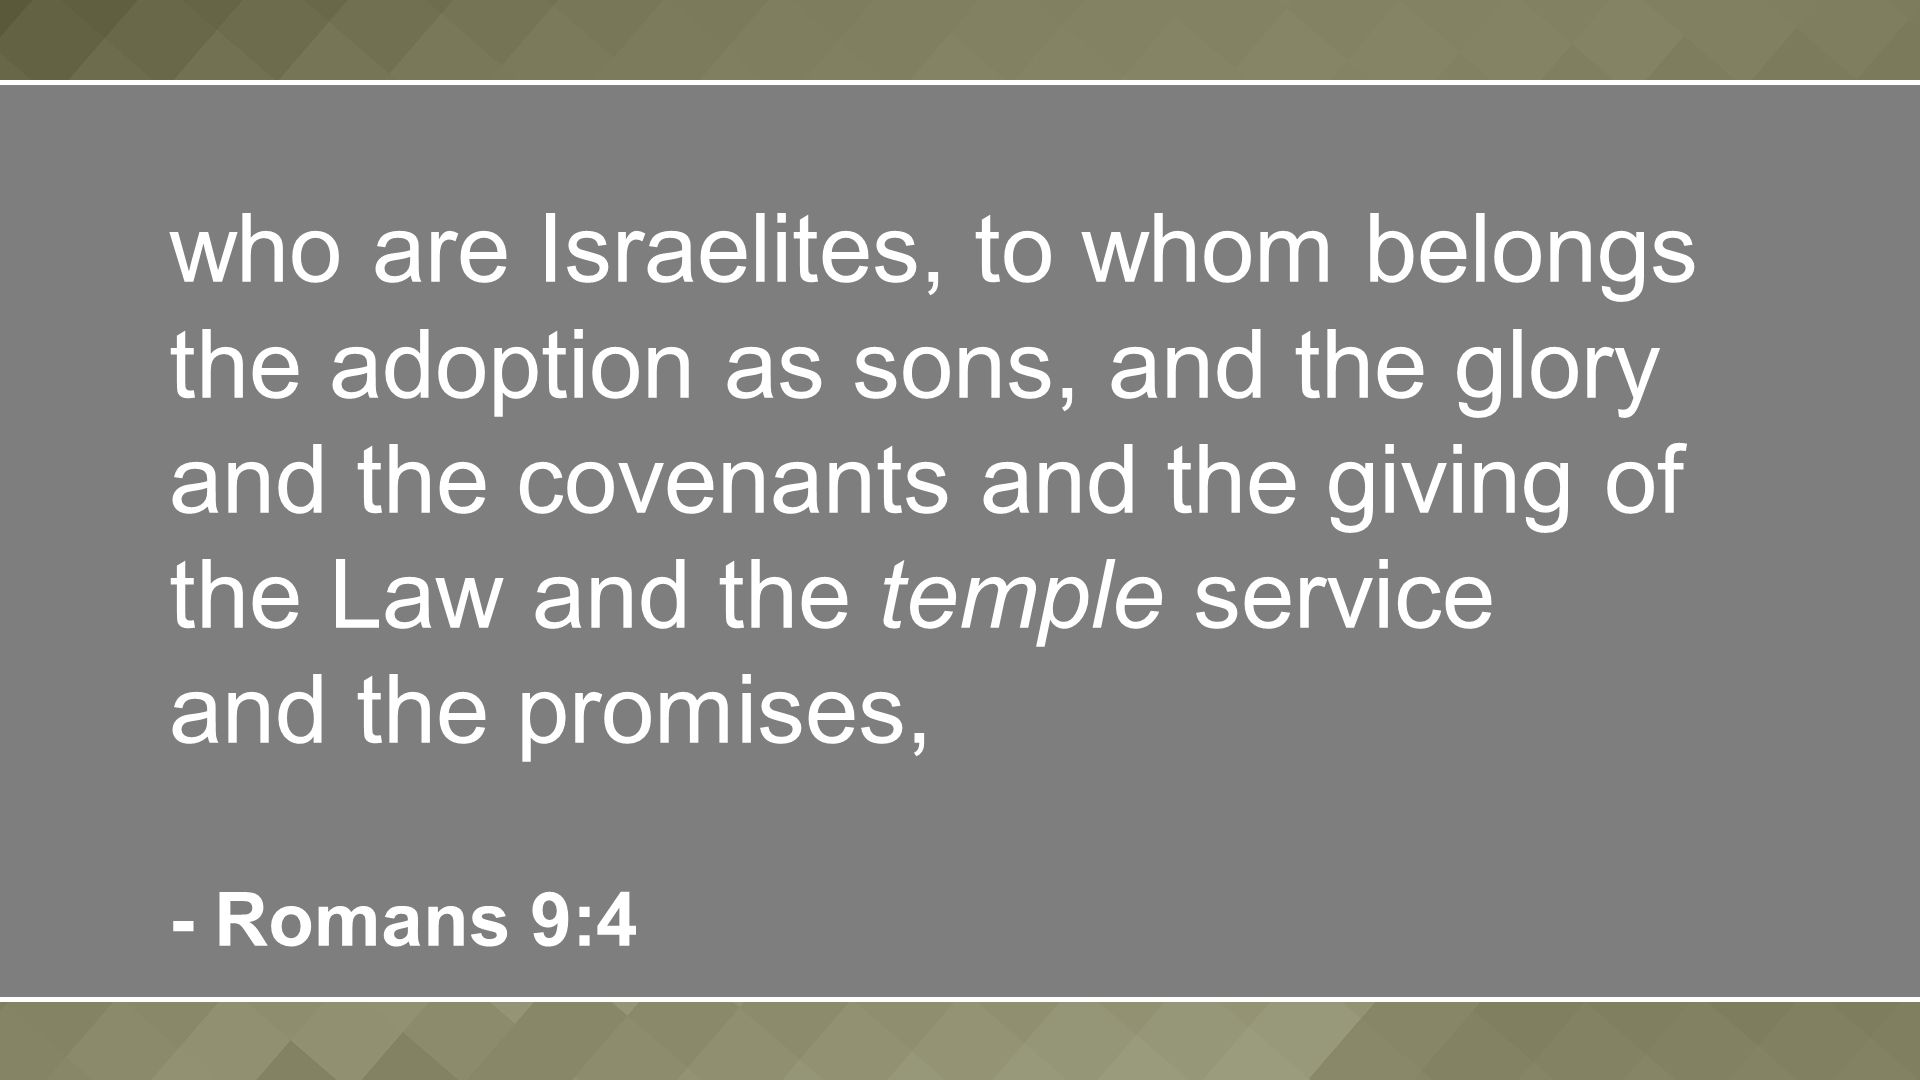 who are Israelites, to whom belongs the adoption as sons, and the glory and the covenants and the giving of the Law and the temple service and the promises, - Romans 9:4